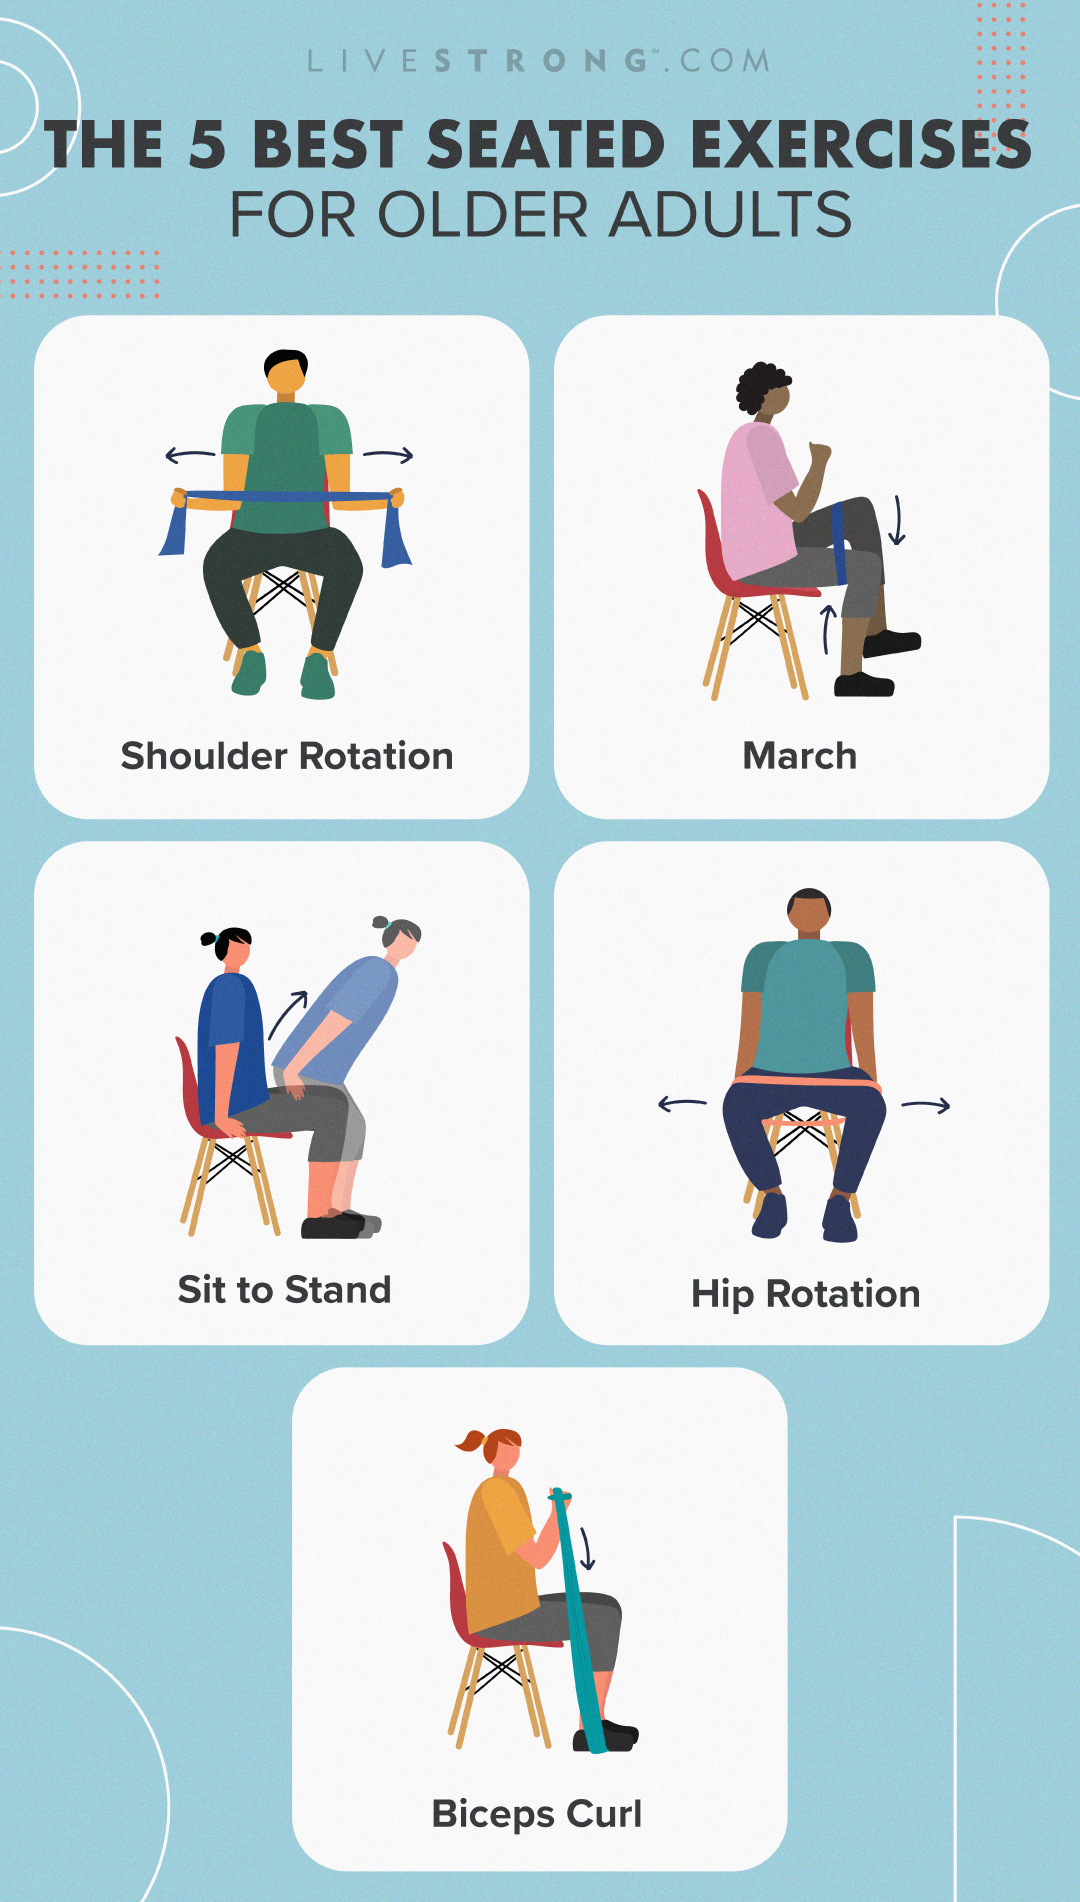 The 5 Best Seated Exercises for Older Adults